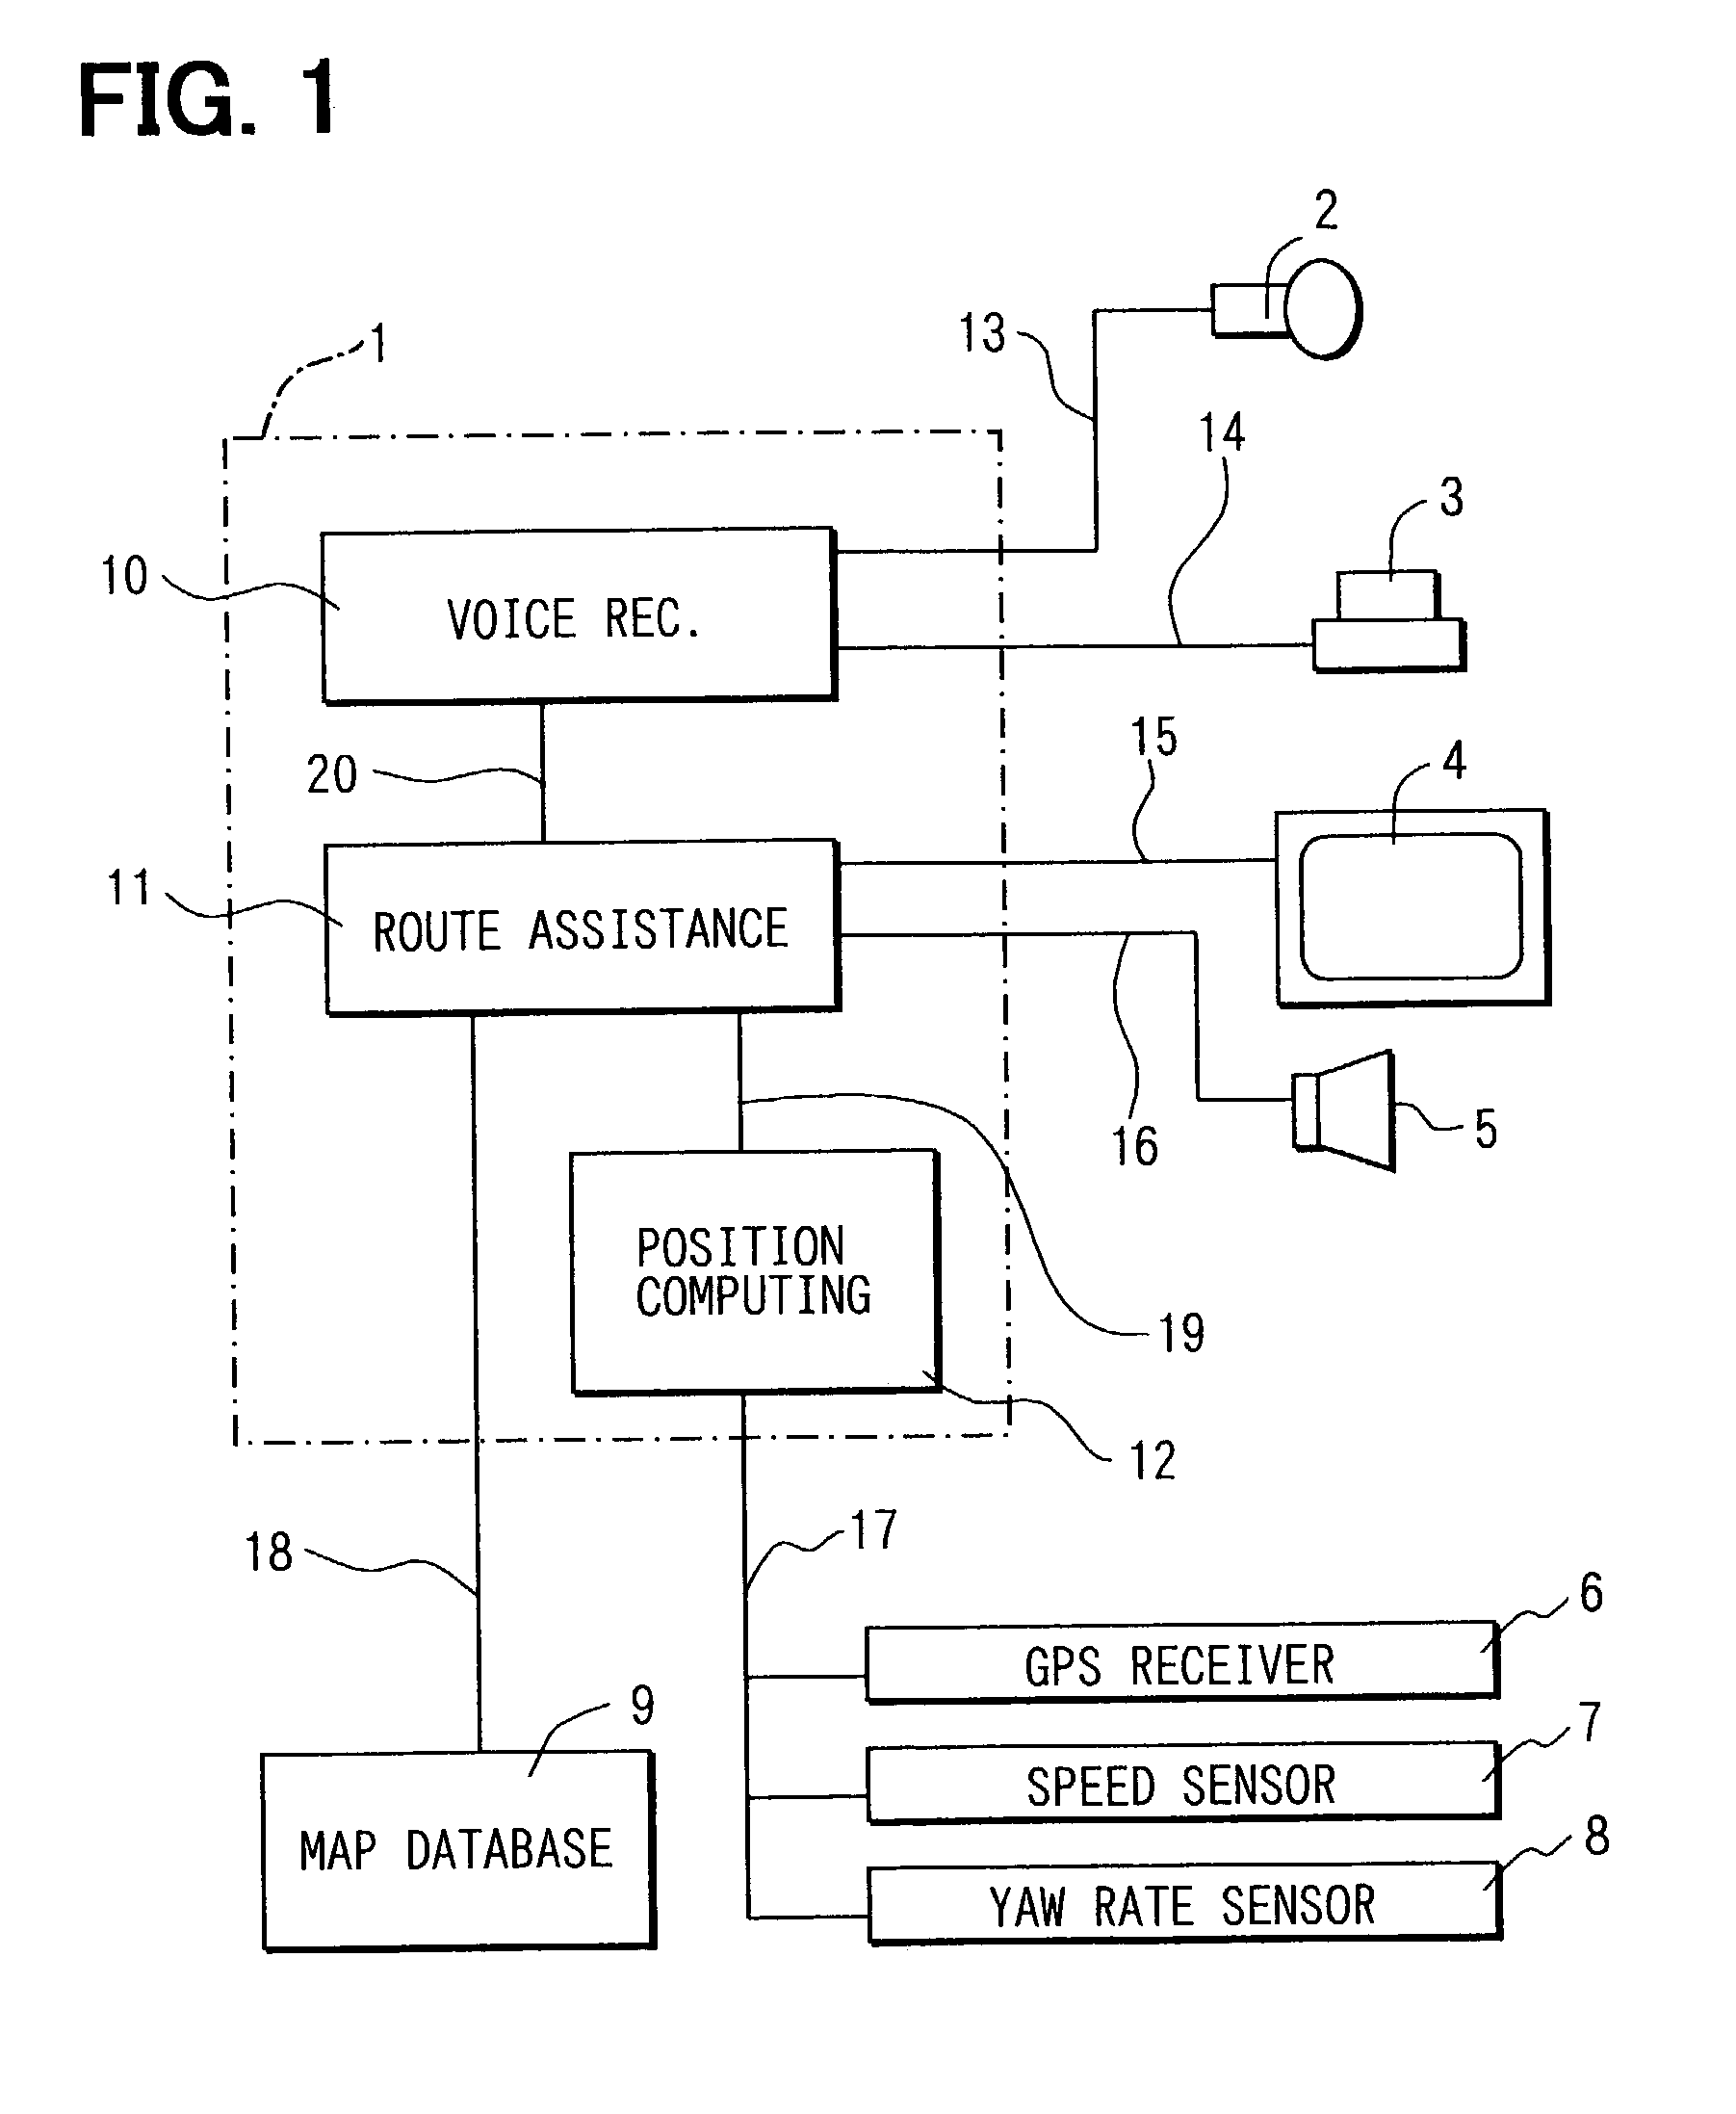 Voice control system notifying execution result including uttered speech content